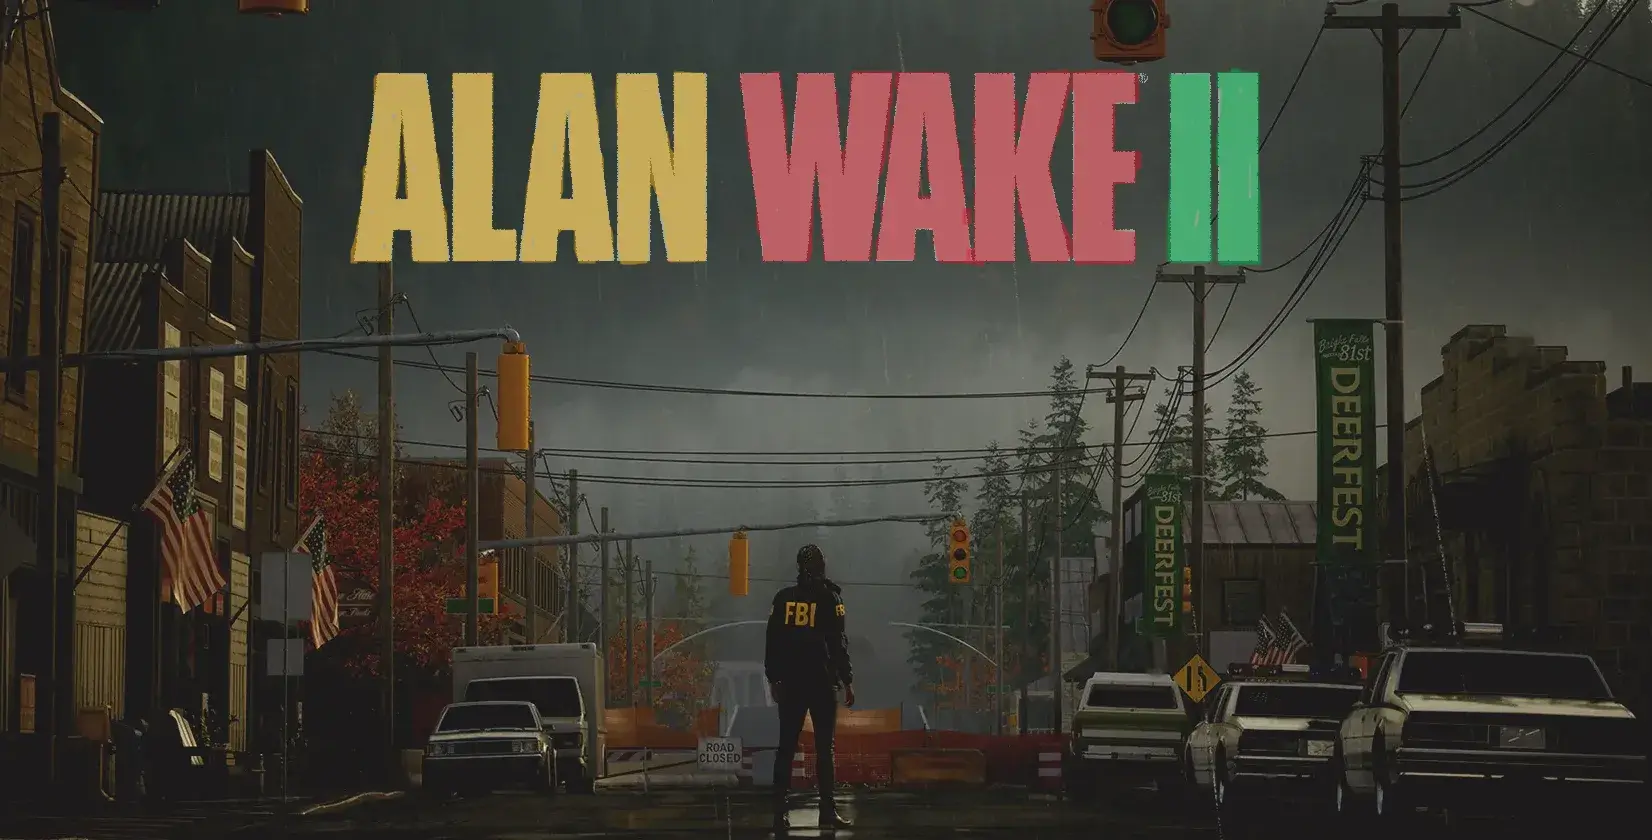 Alan Wake 2 PC minimum requirements and recommended specs